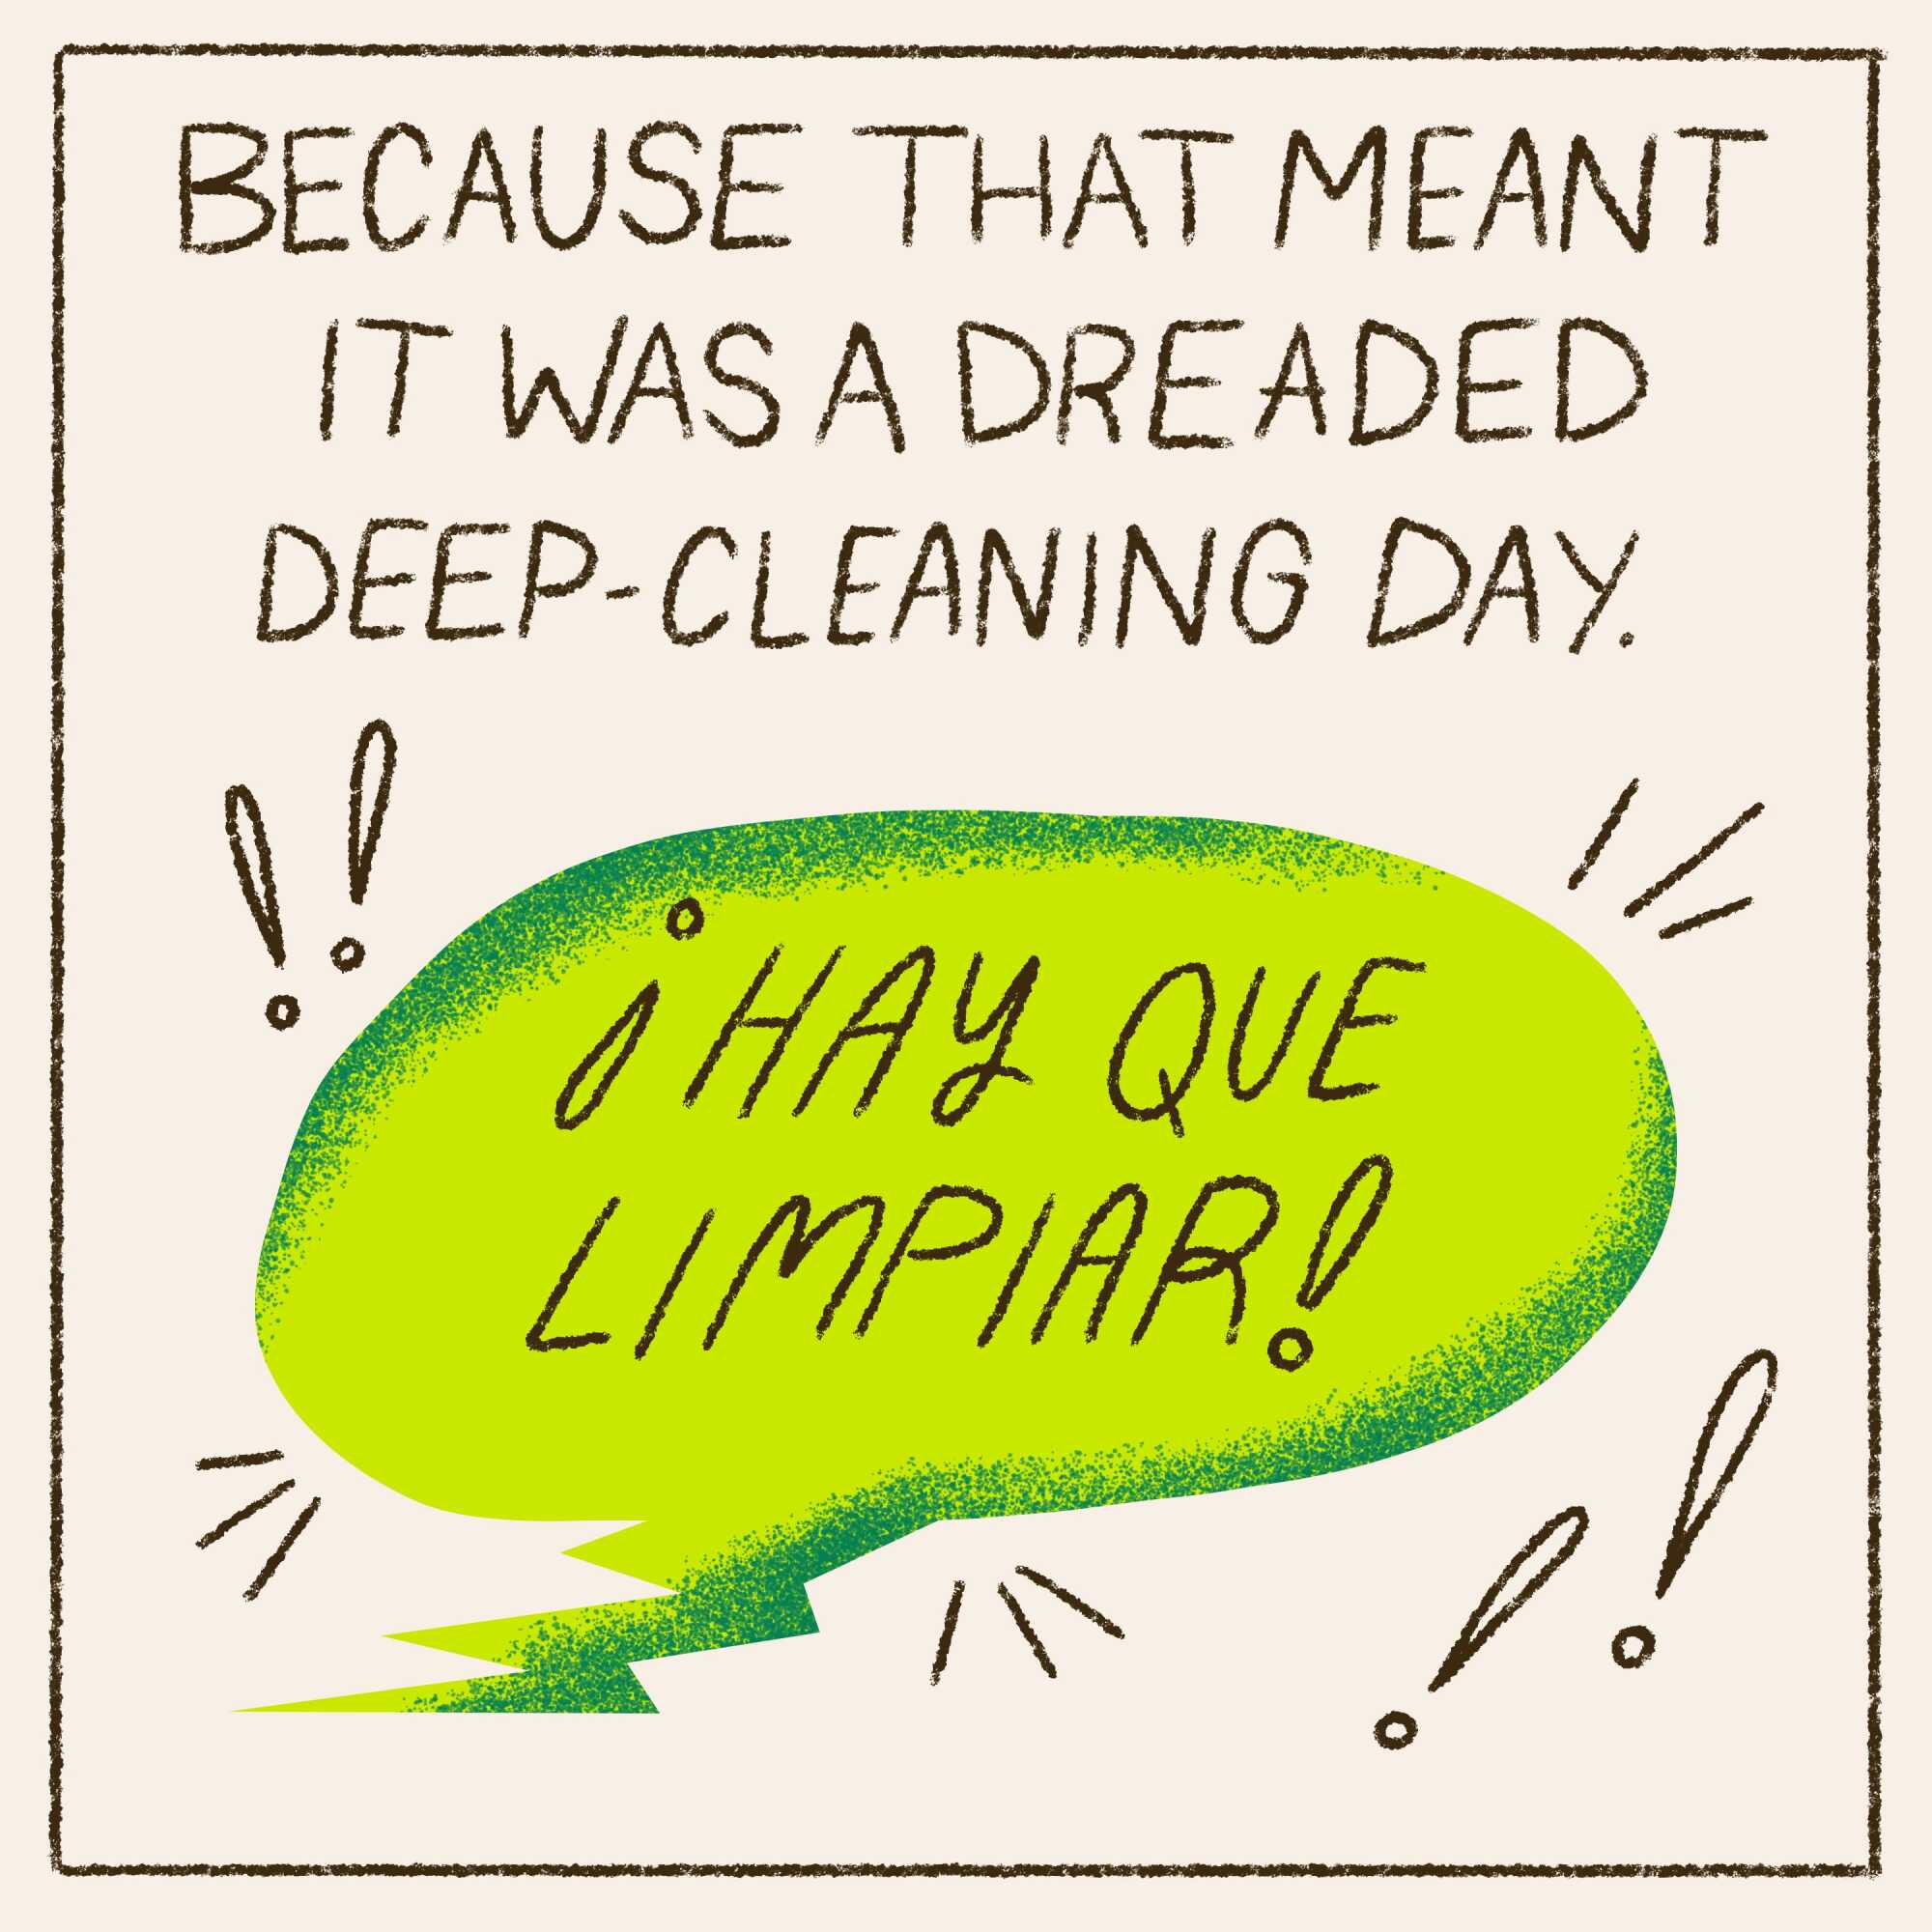 Because that meant it was a dreaded deep-cleaning day.